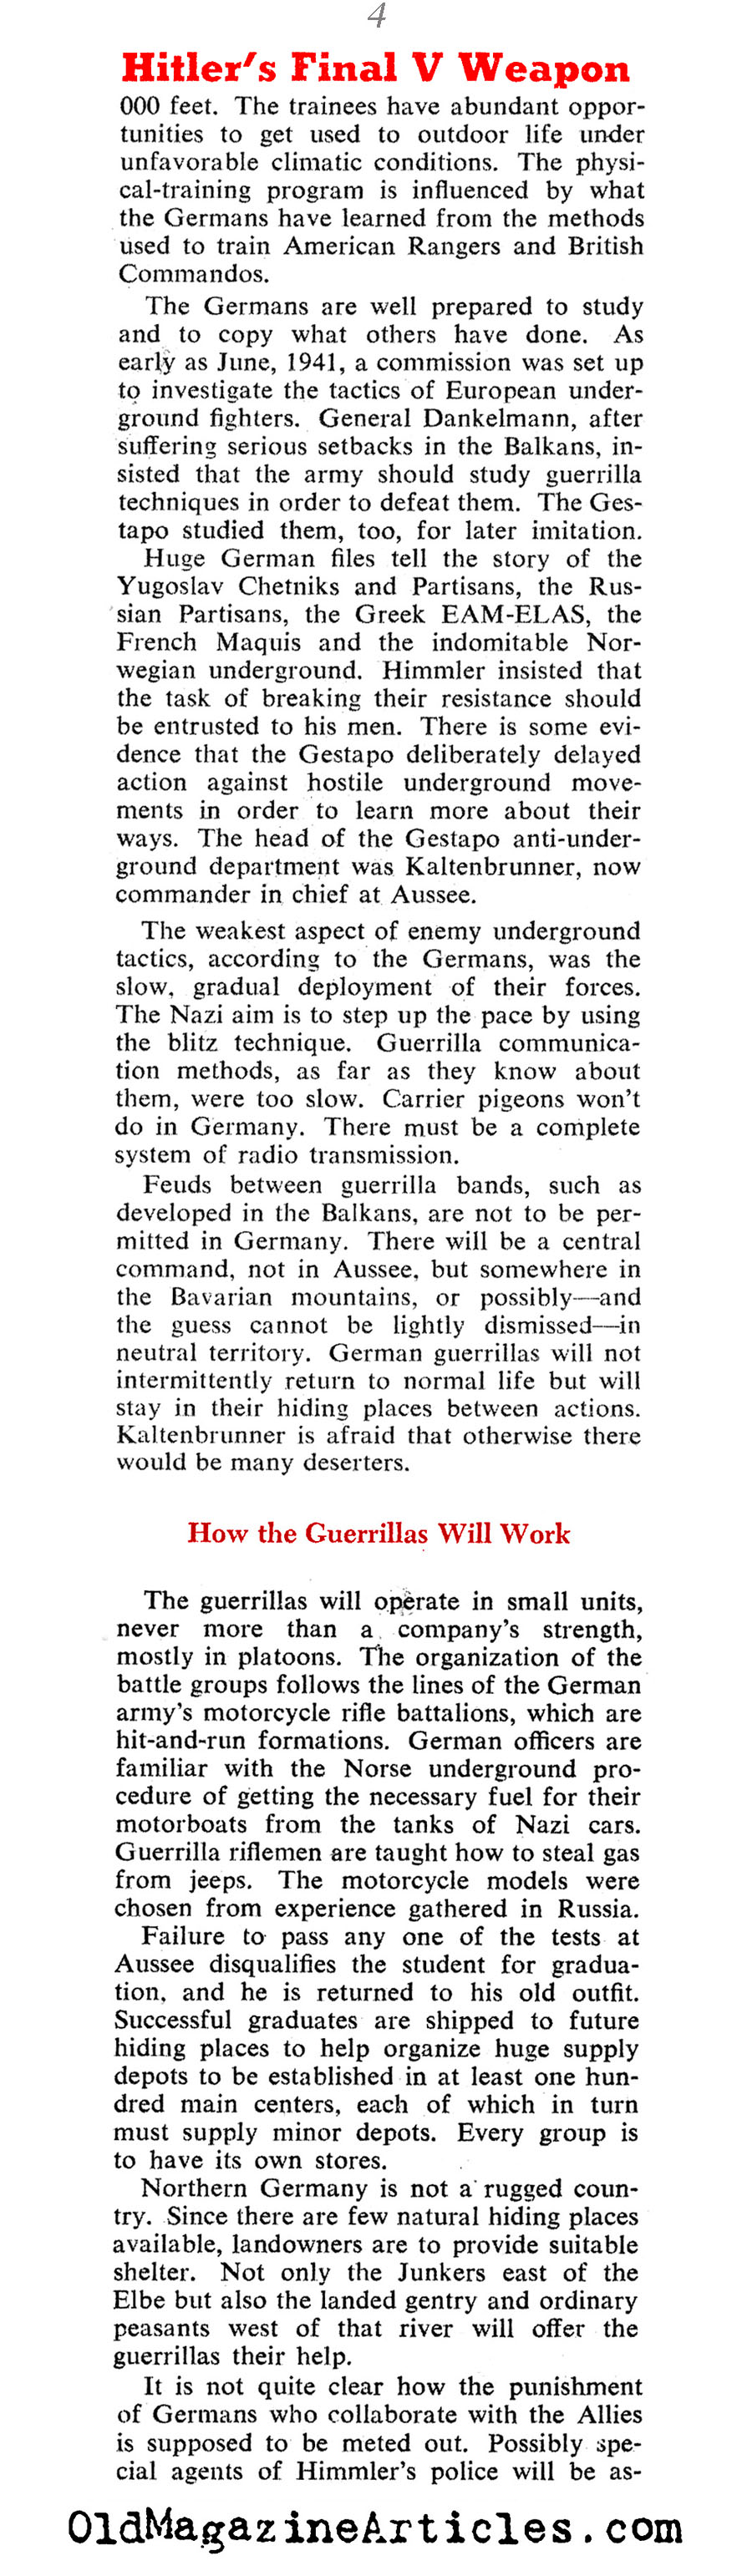 The Guerrilla War That Never Was (Collier's Magazine, 1945)